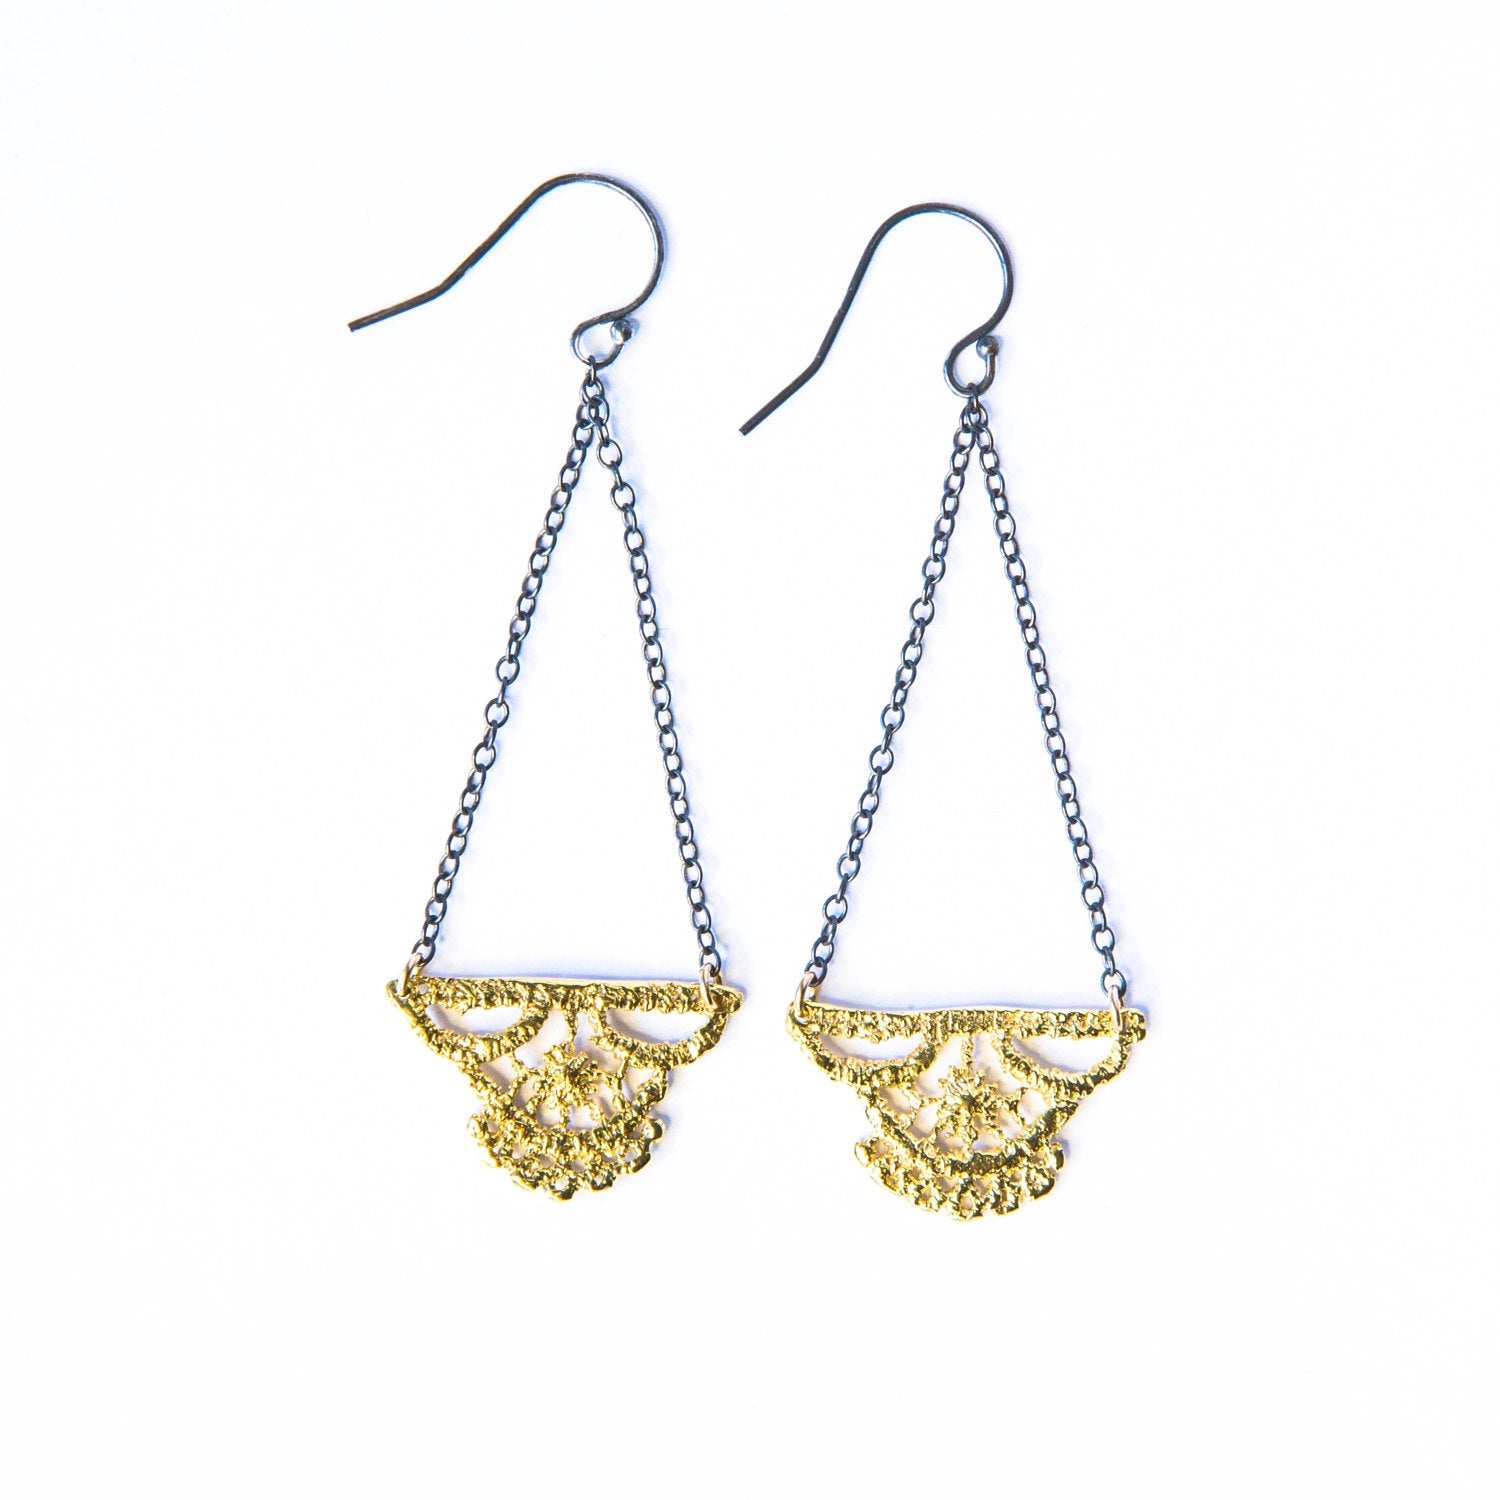 Lily lace earrings chandelier in 14k yellow gold filled